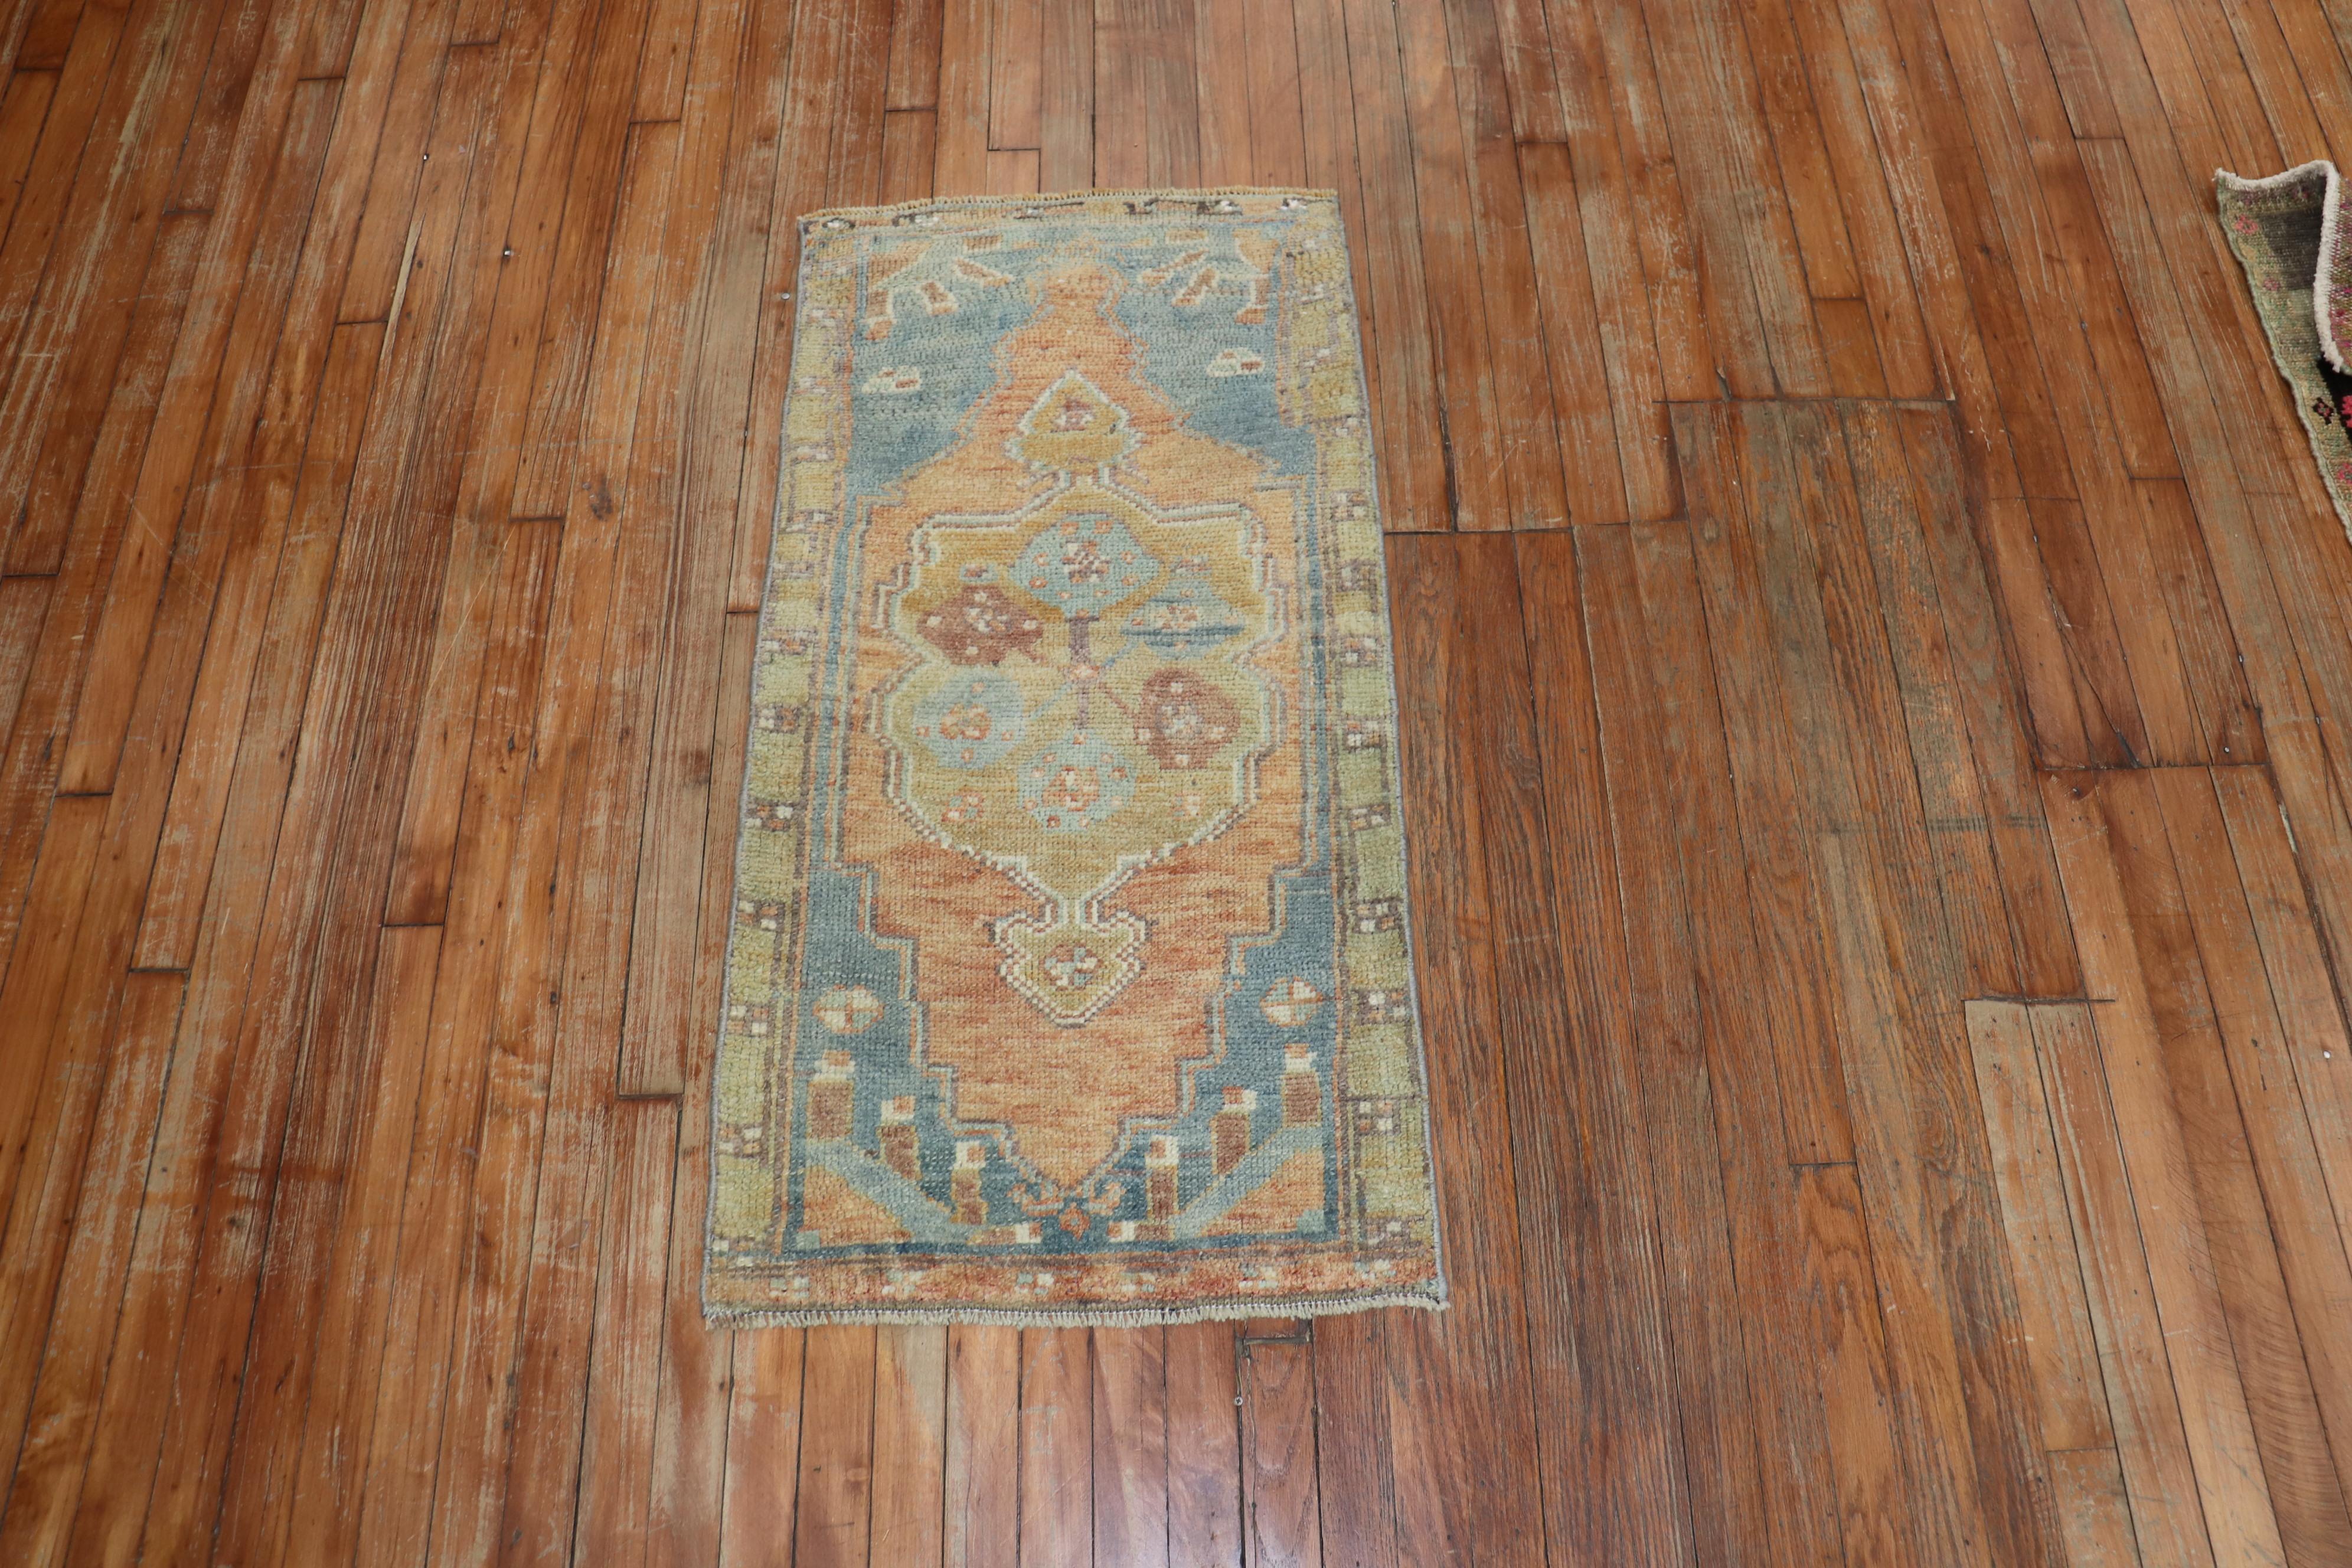 Apricot gray blue color mid-20th century Turkish Mat rug.
Measures: 2' x 3'10